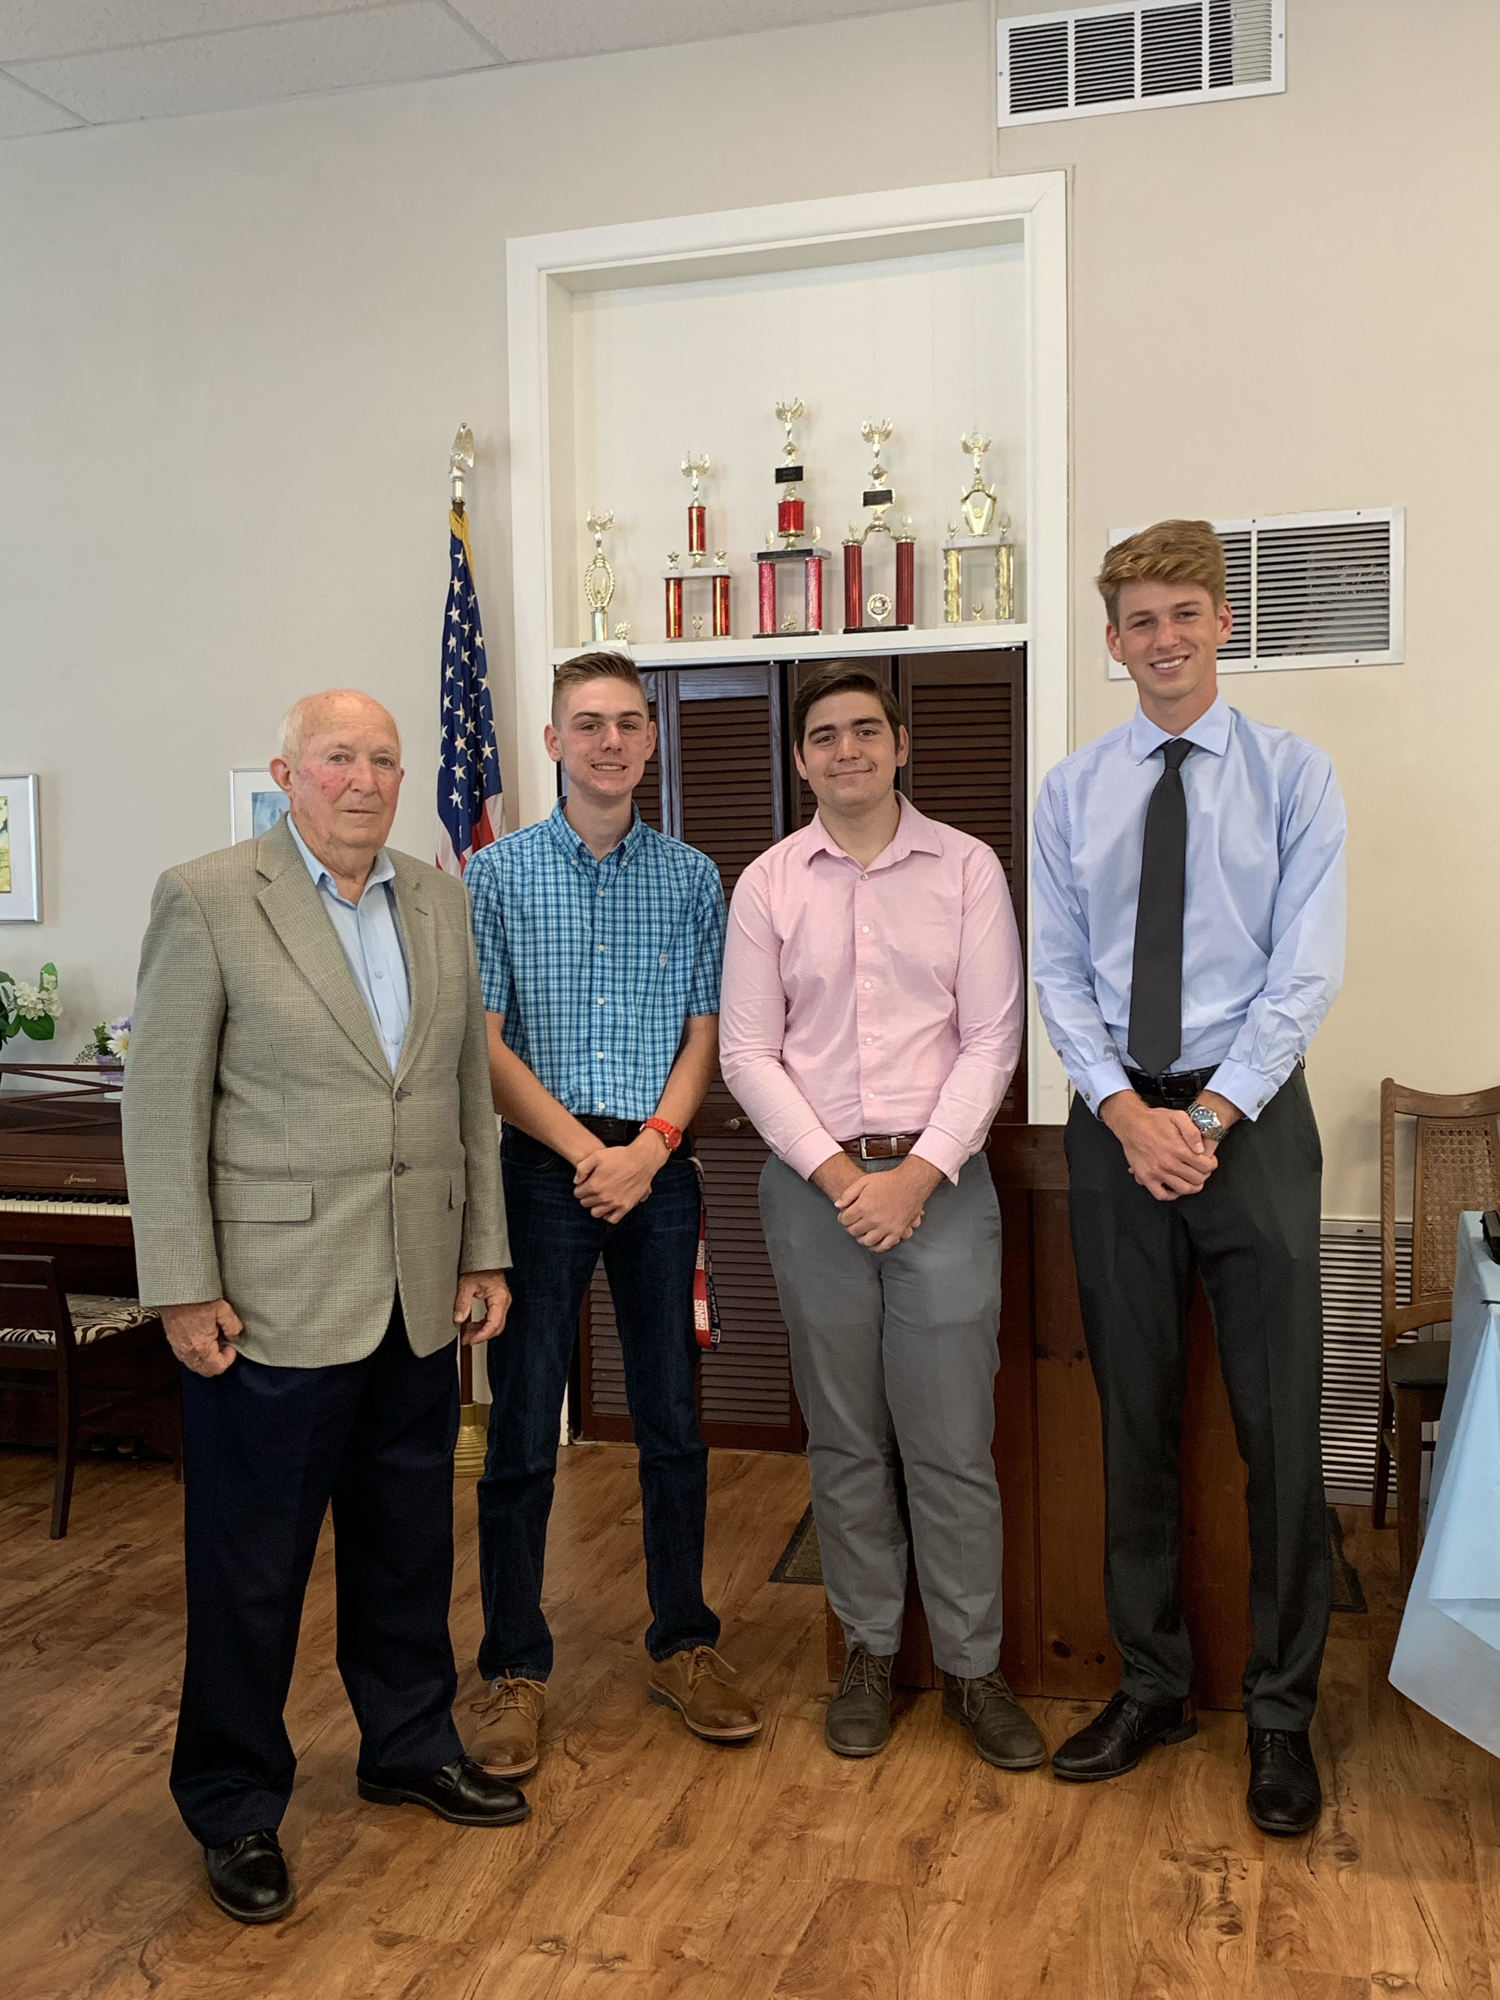 Gerard Slovak with Flagler Woman’s Club scholarship recipients Derek Hart, Tyler Perry, and Brock Underberg. Not pictured: Megan Brink and Daniella Shordone. Photo courtesy of Flagler Woman's Club